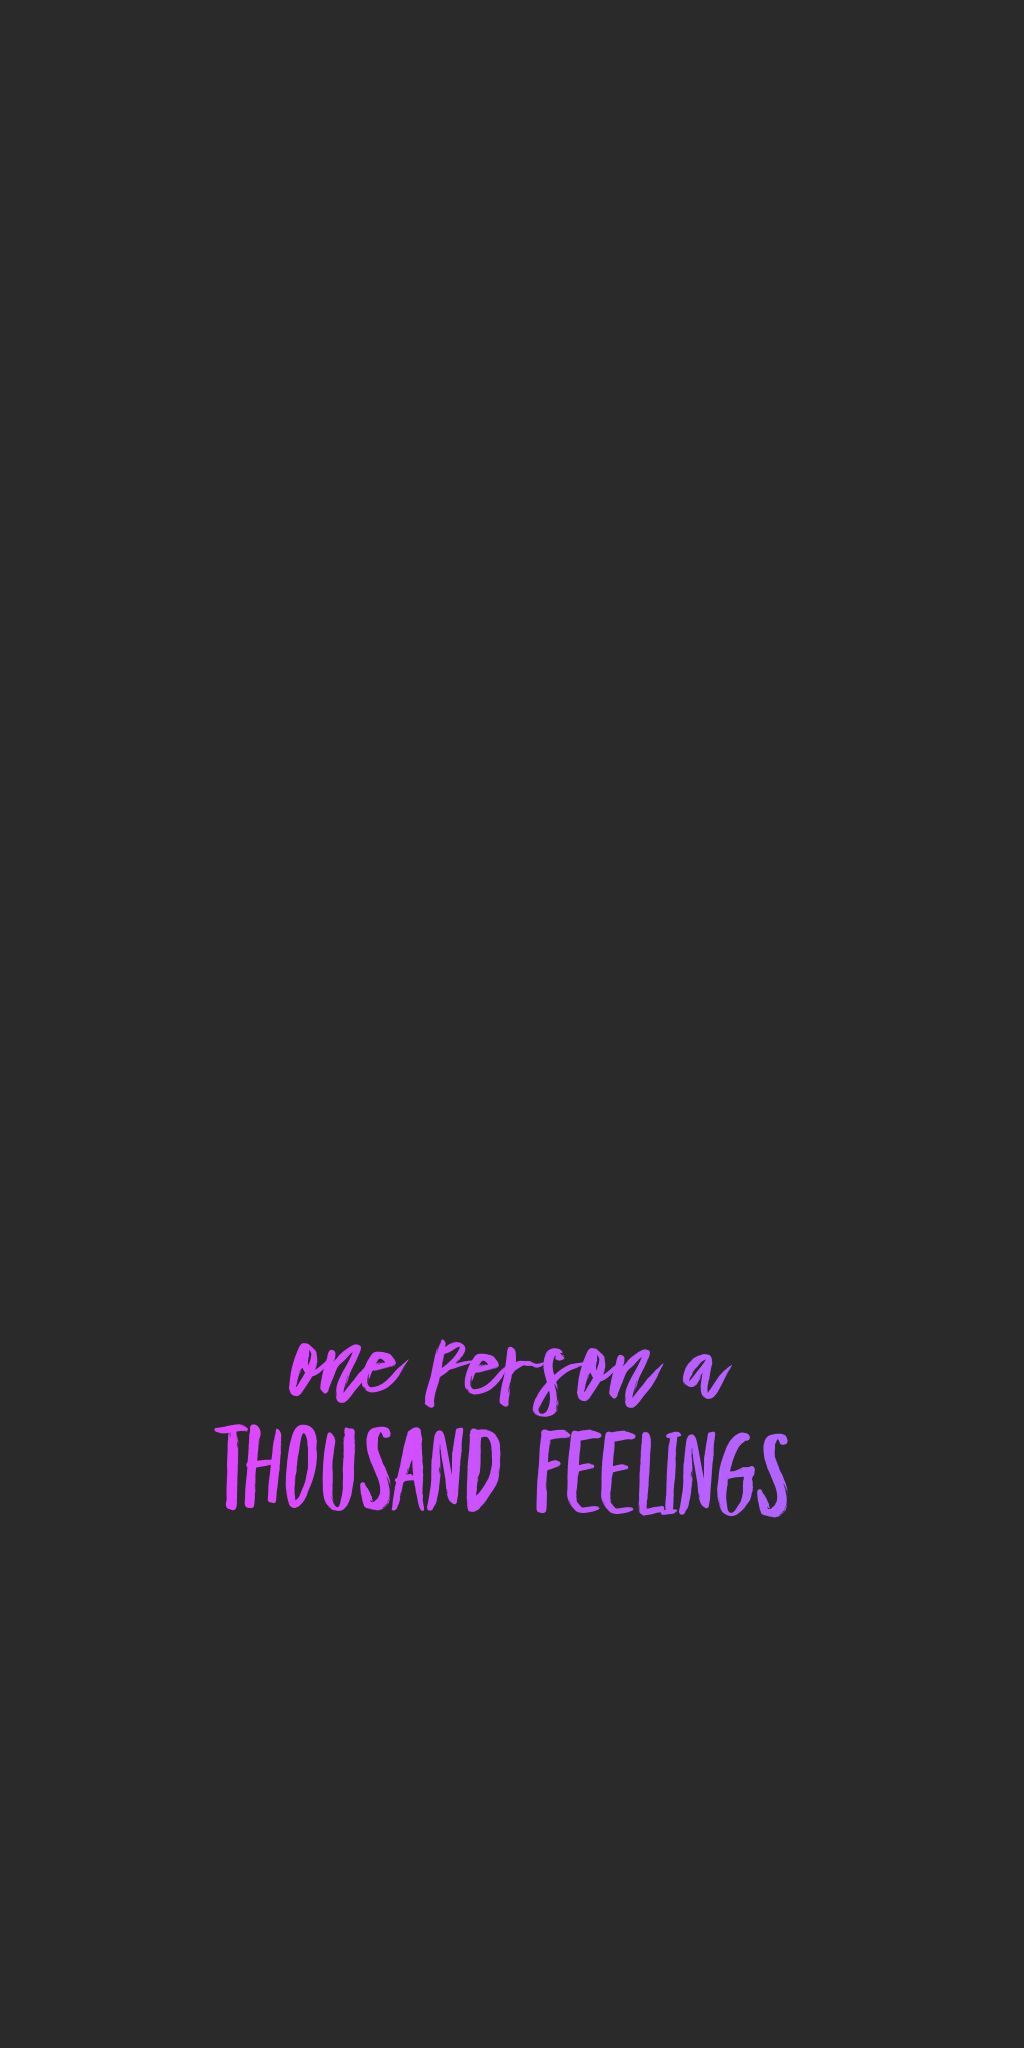 One person a thousand feelings - Purple quotes